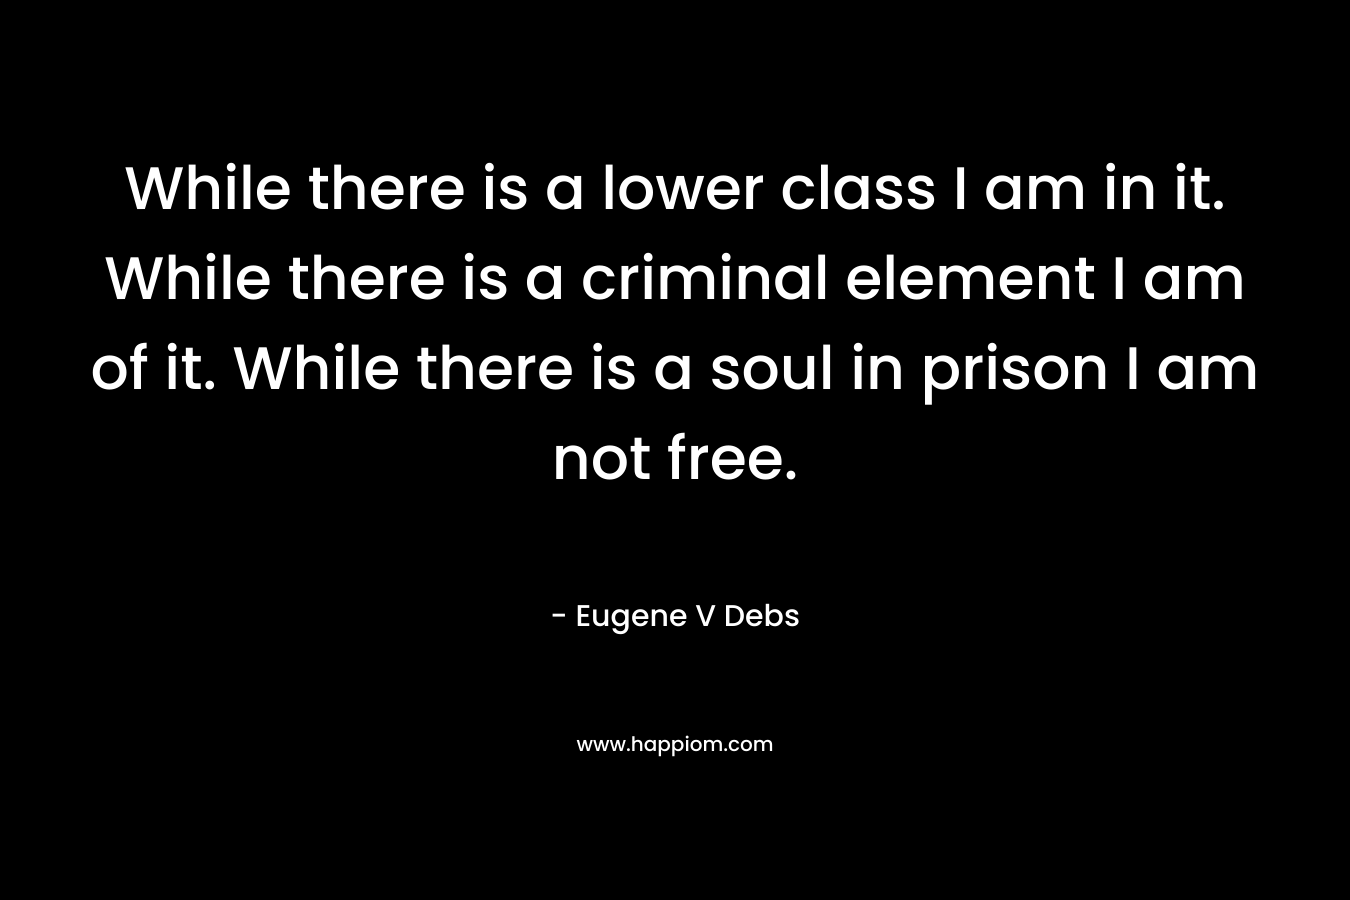 While there is a lower class I am in it. While there is a criminal element I am of it. While there is a soul in prison I am not free.